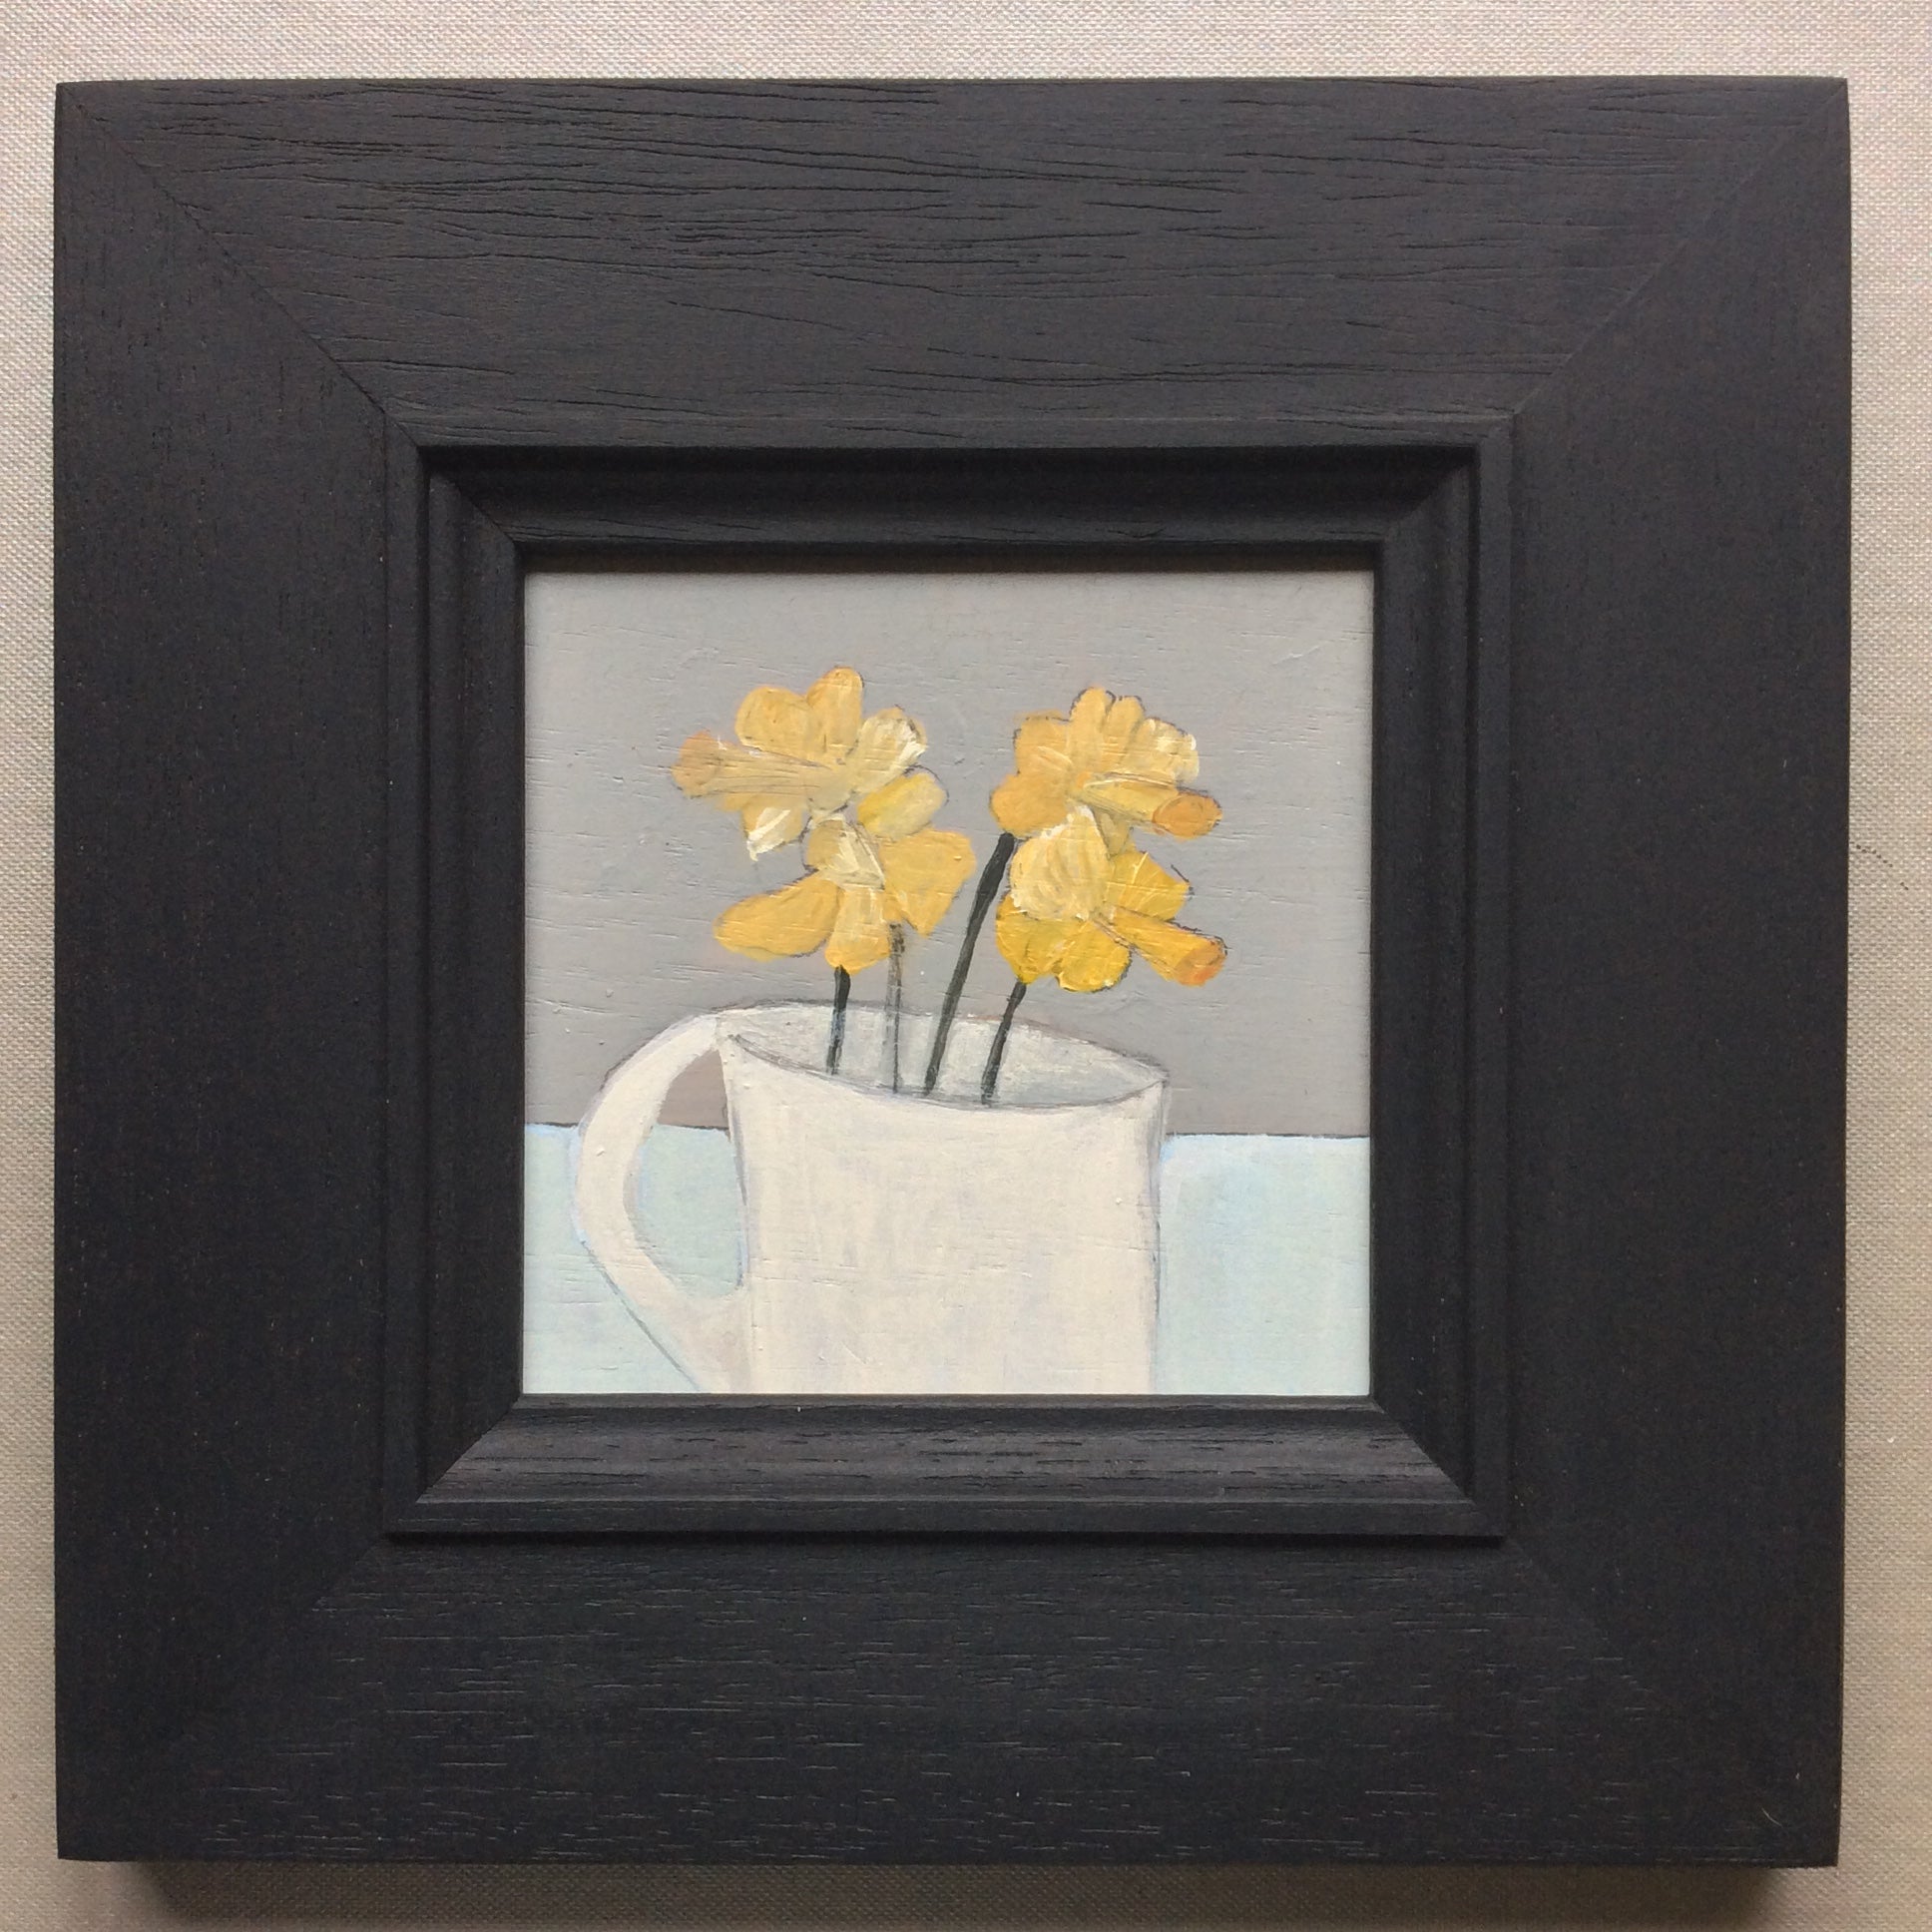 Mixed Media art on wood By Louise O’Hara  “Daffodils from the garden”